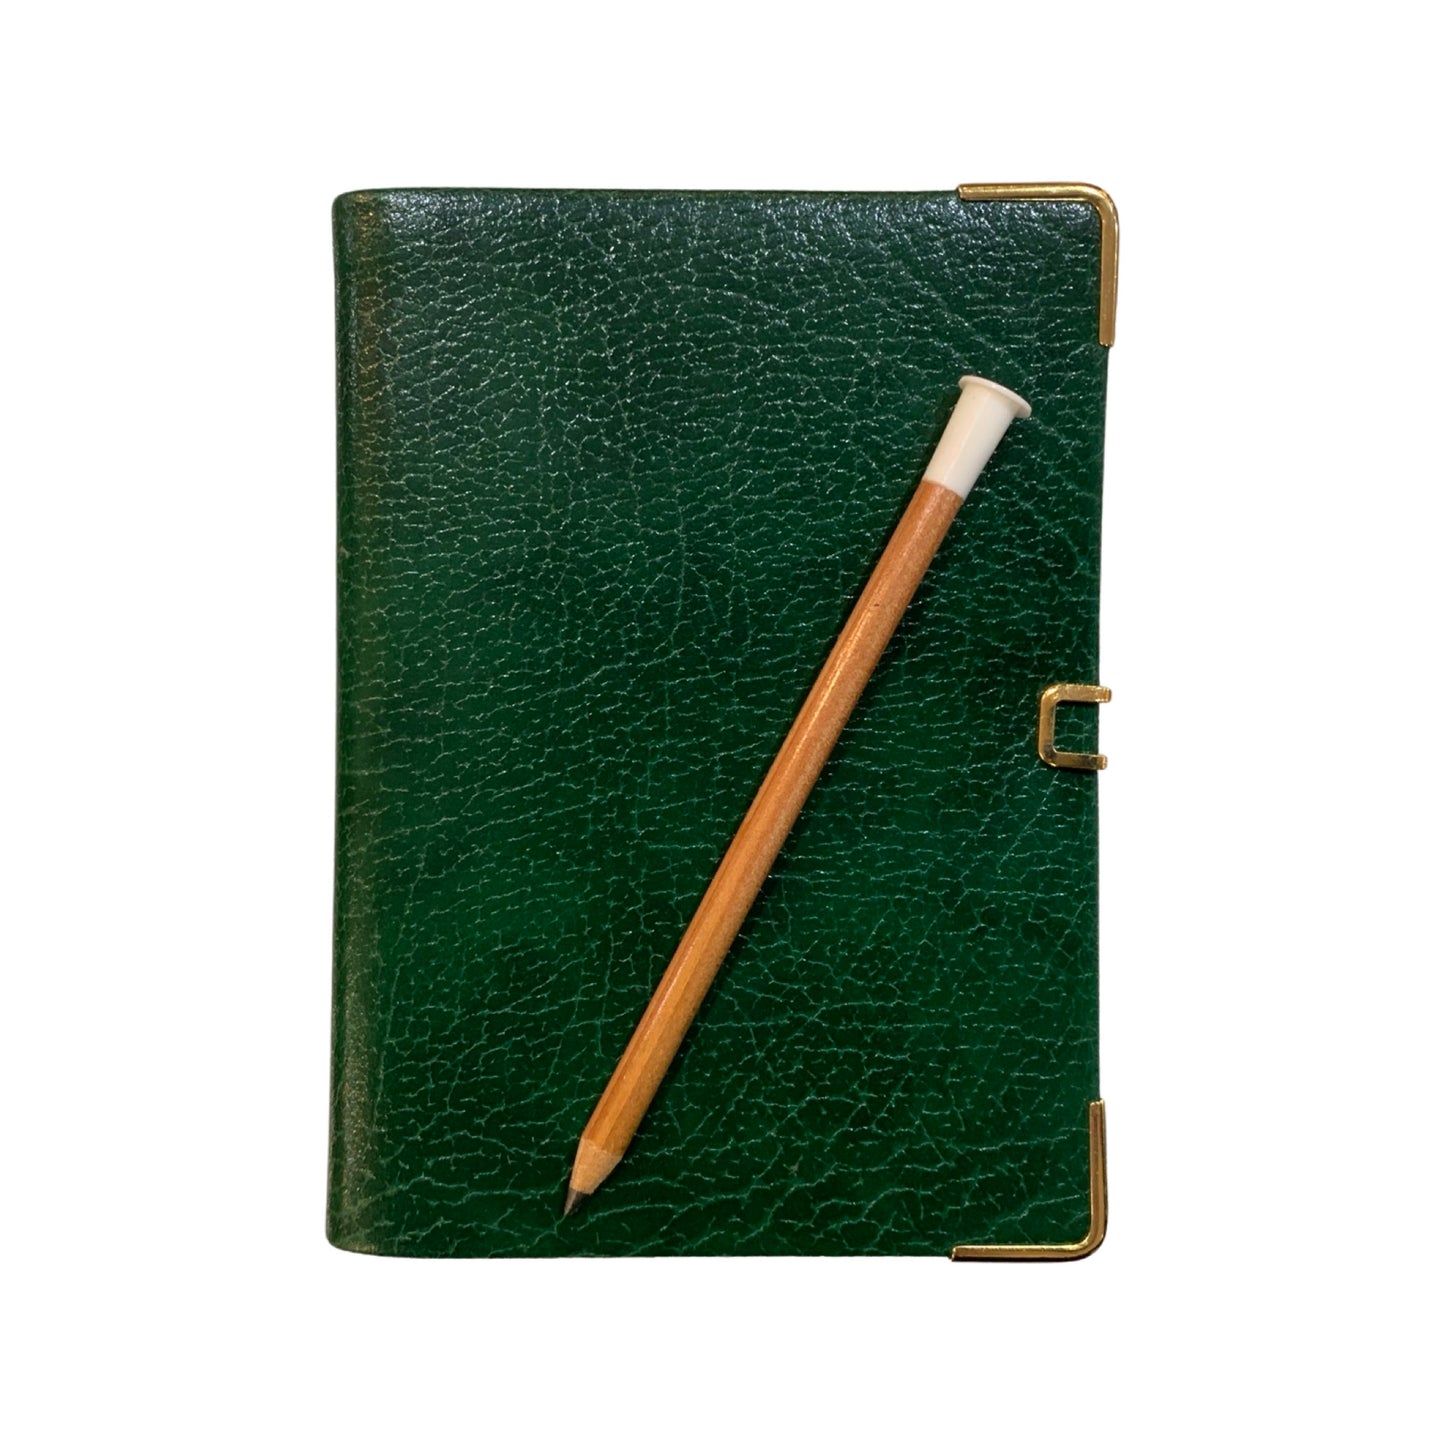 Address Book, 4 by 2.75 inches | Buffalo Embossed Calf | with Pencil and Clasp | A42BJC